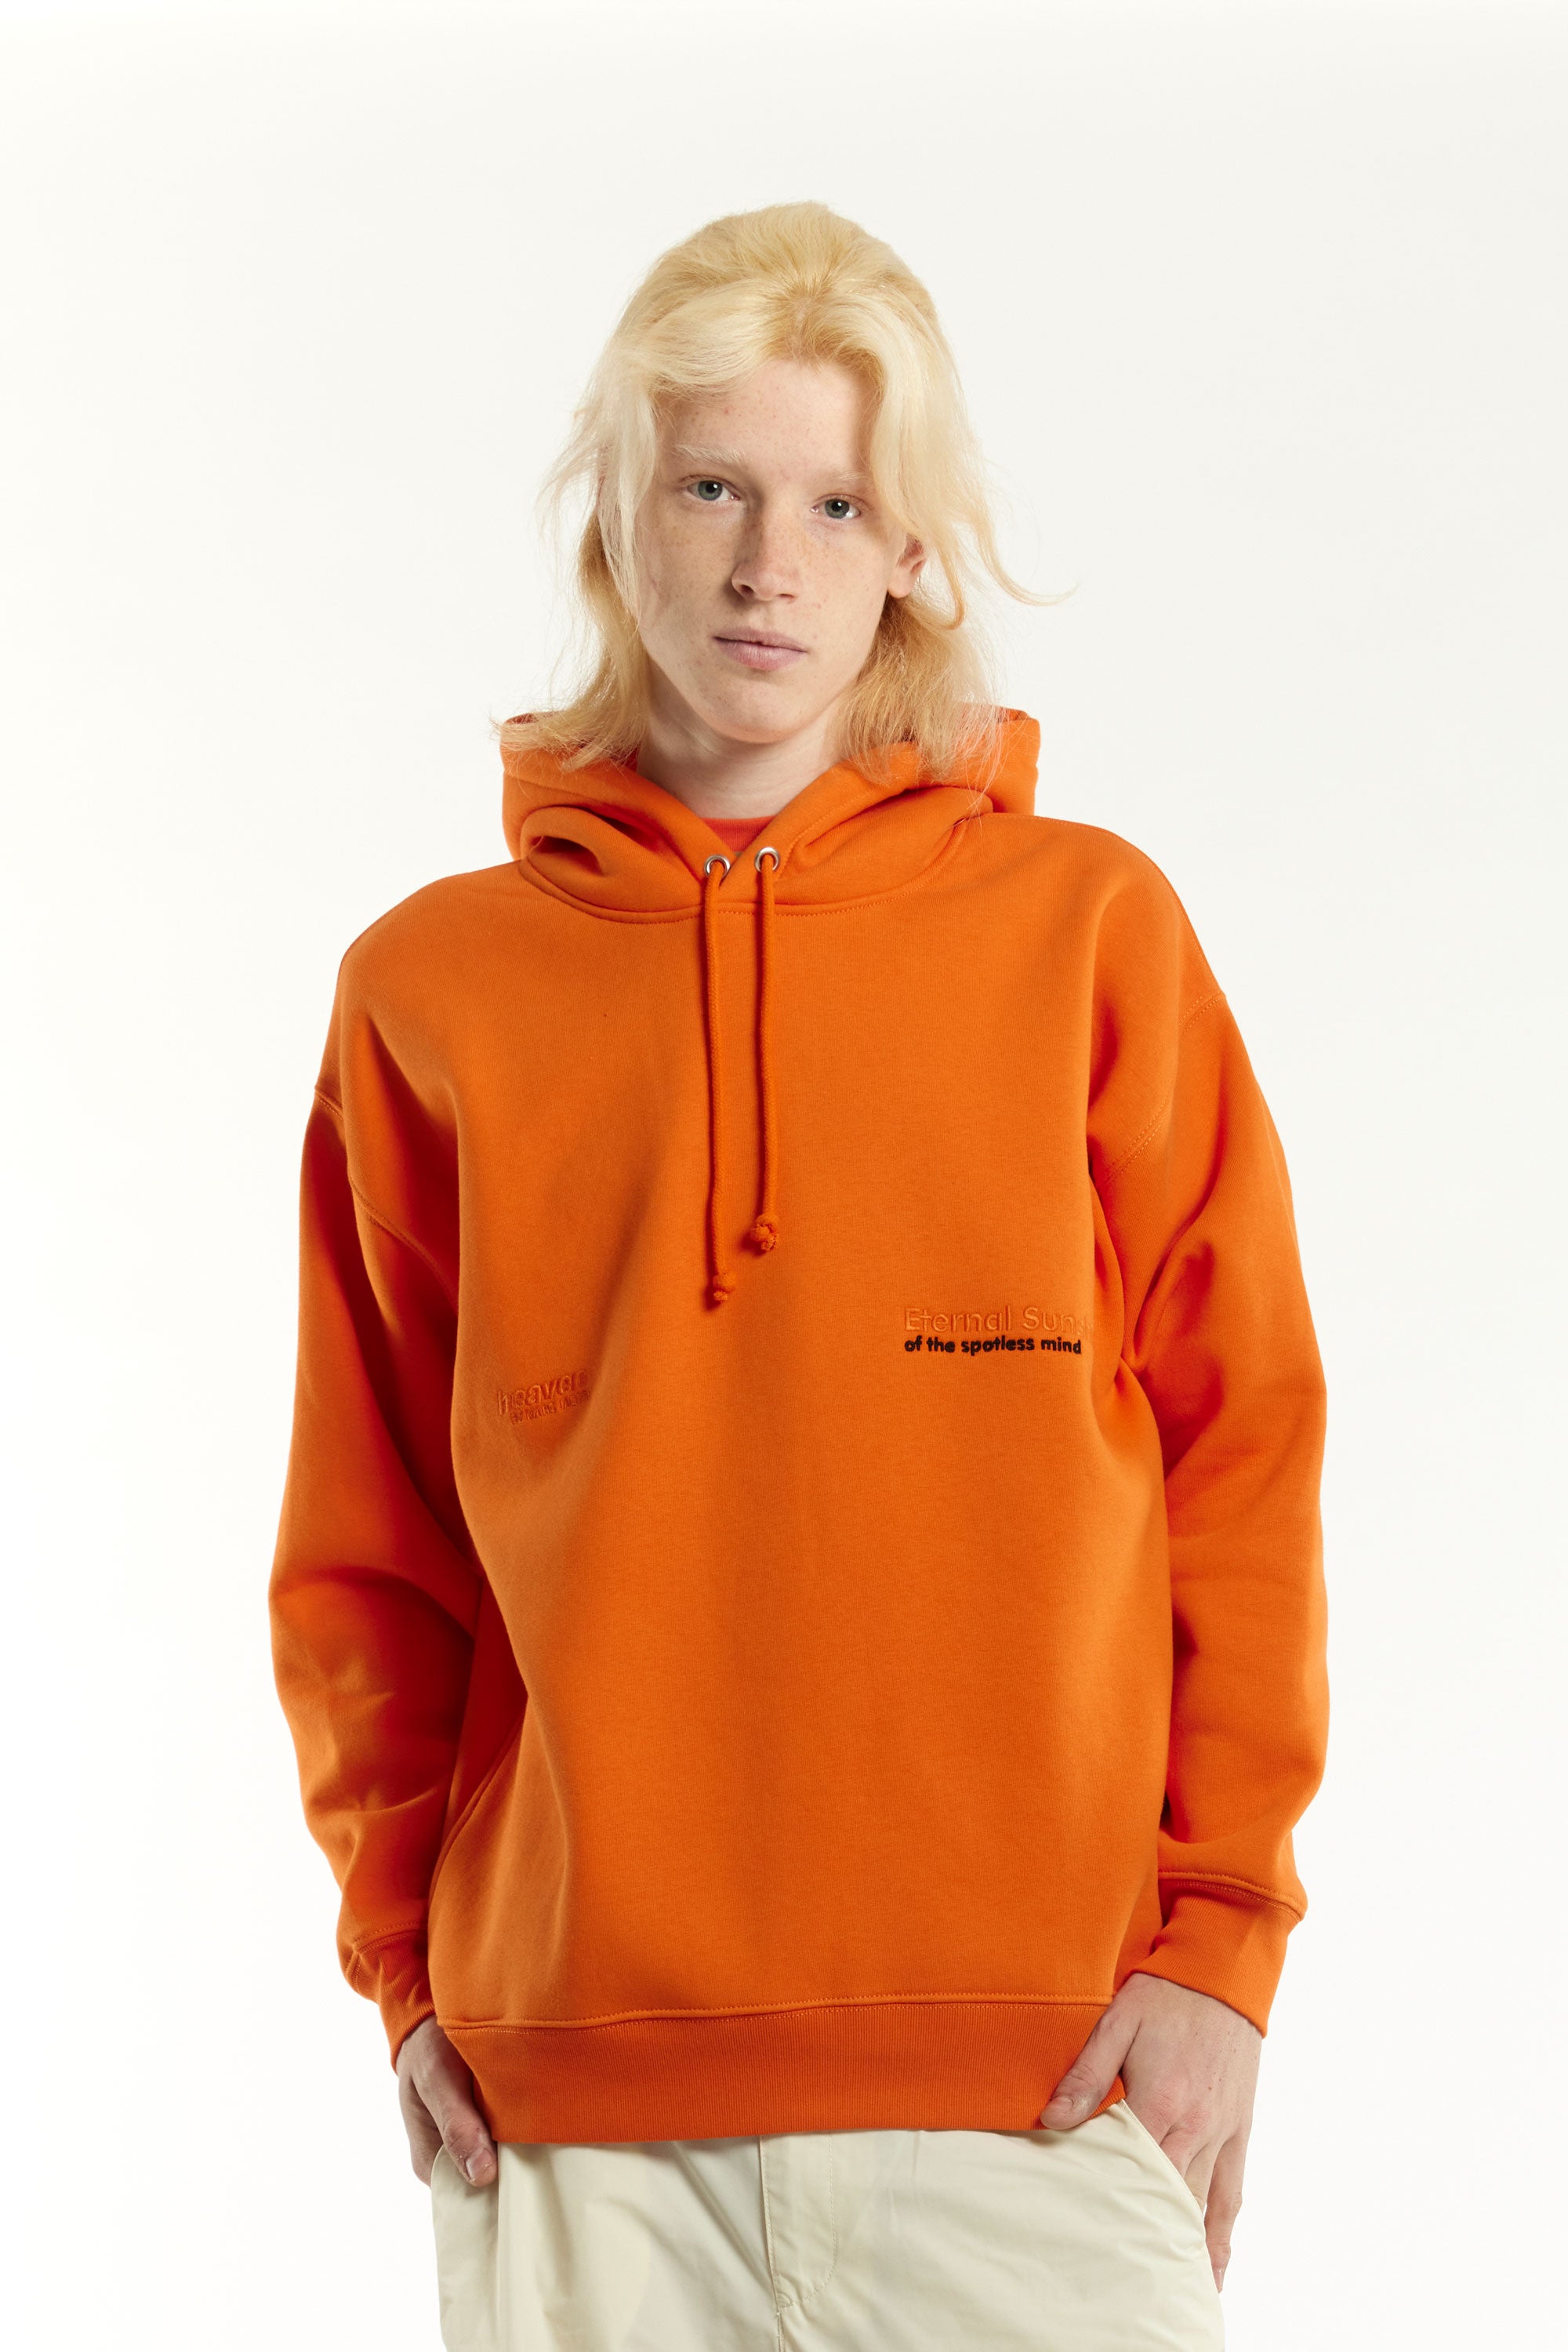 The HEAVEN - CLEMENTINE BIG HOODIE  available online with global shipping, and in PAM Stores Melbourne and Sydney.